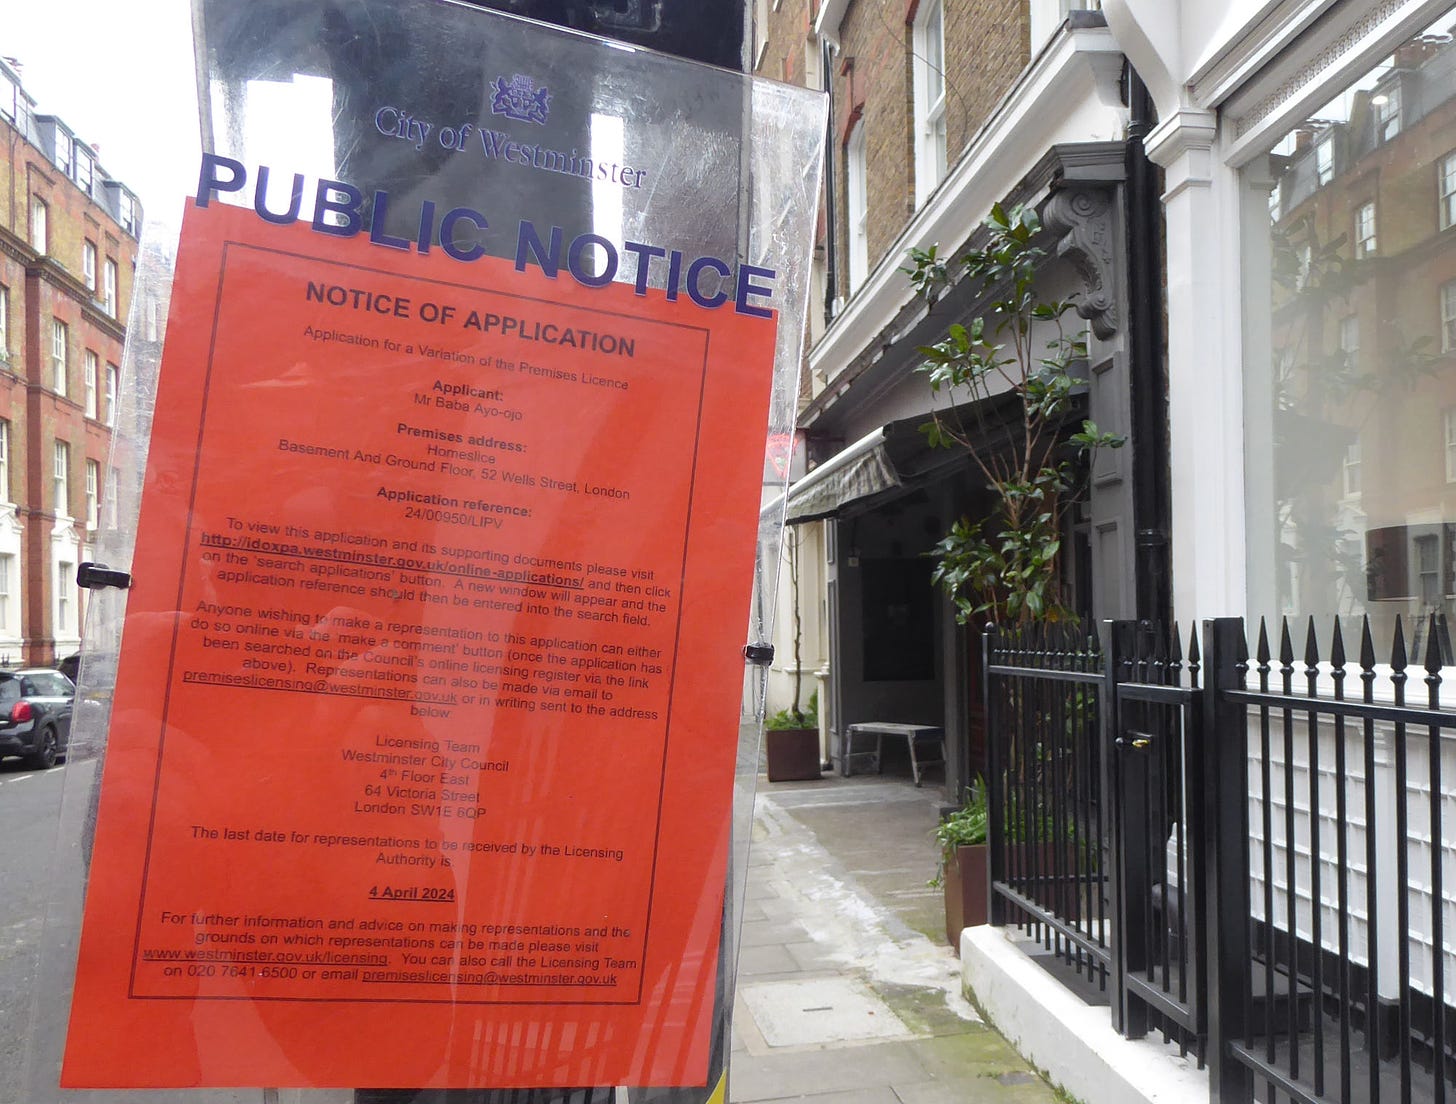 Notice of a licensing application to open until 2am posted on a lamppost.